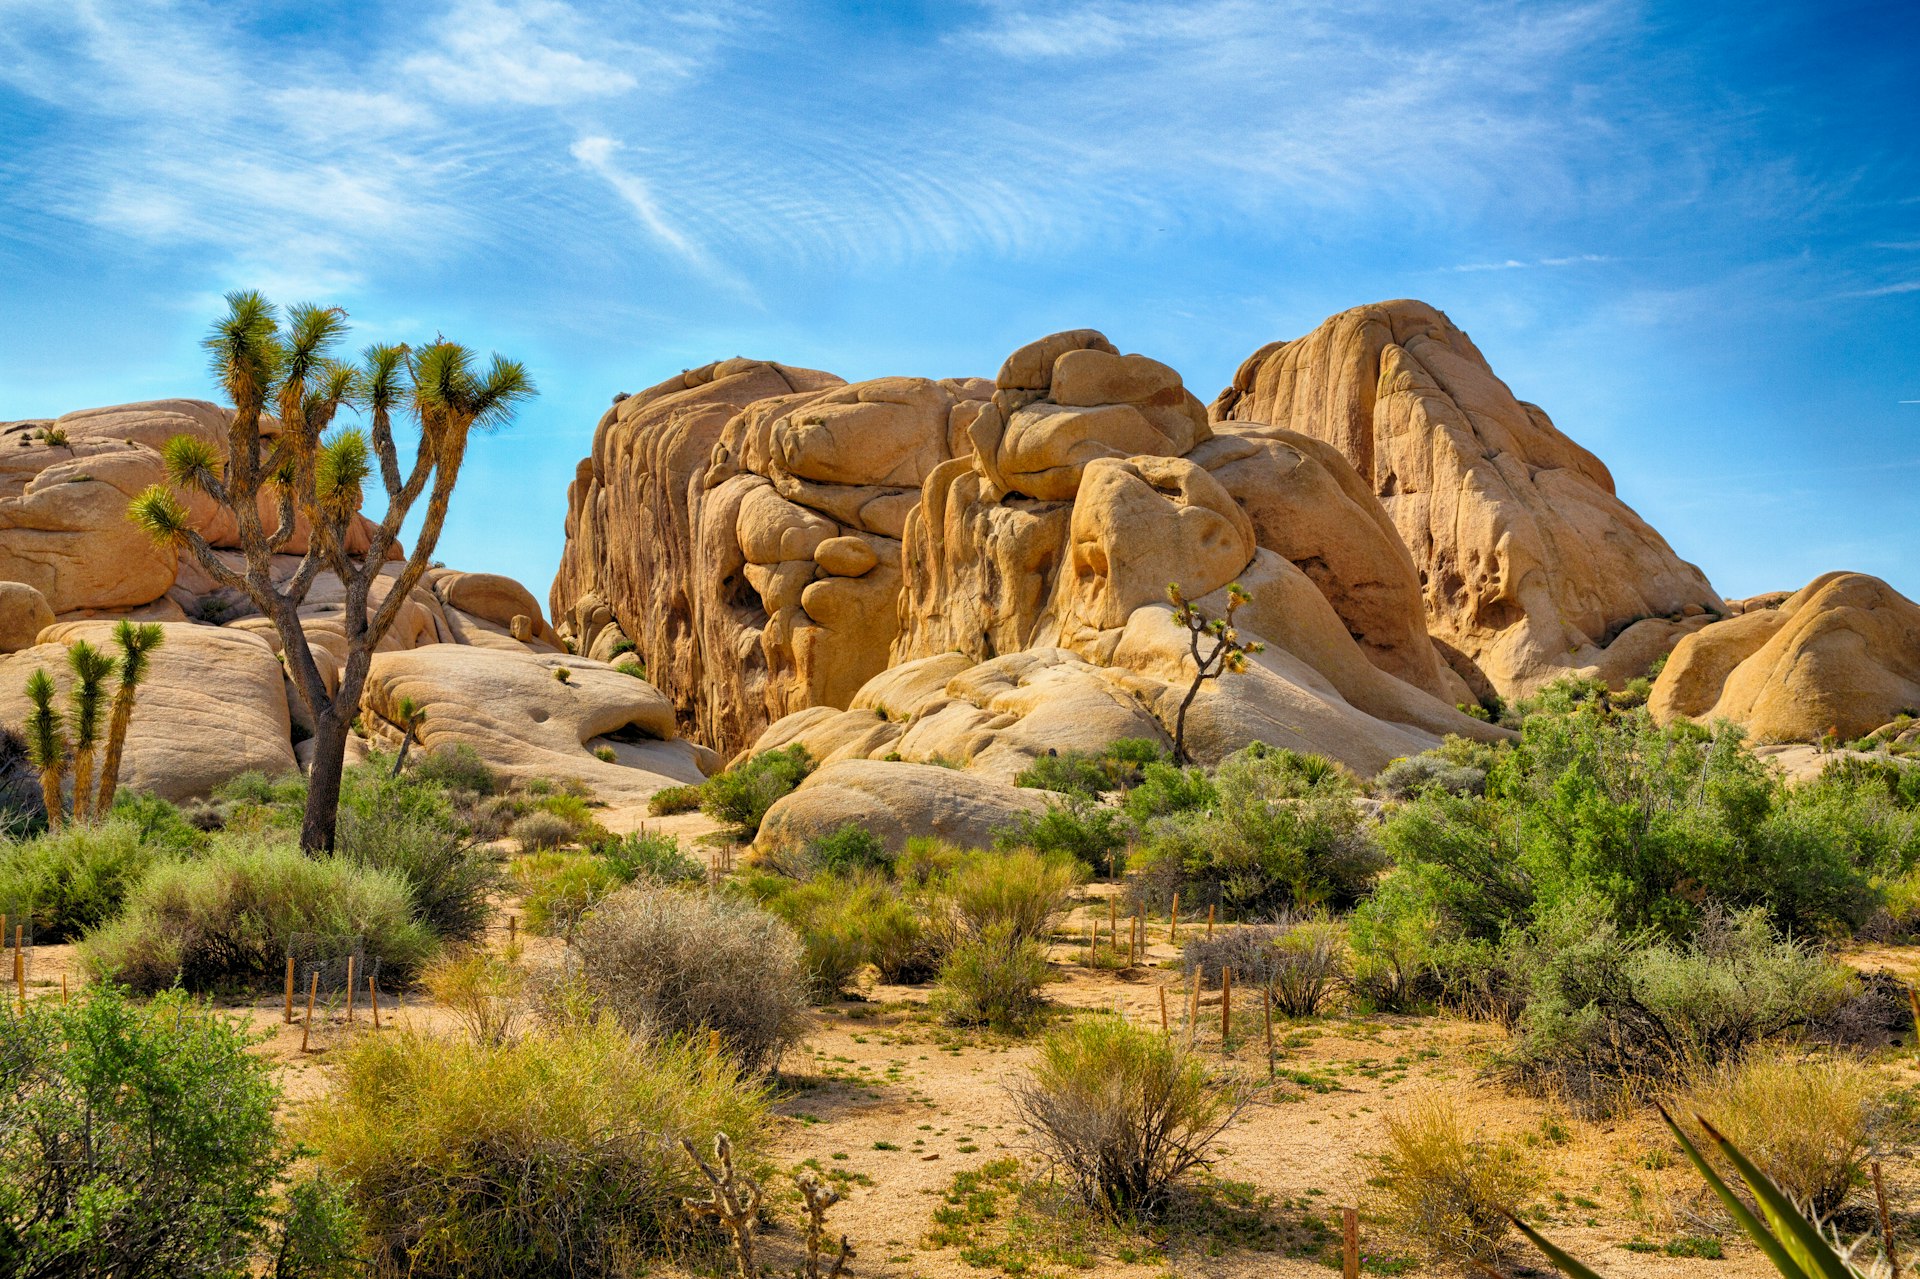 Boulders and Joshua Trees in Joshua Tree National Park in bright sunlight